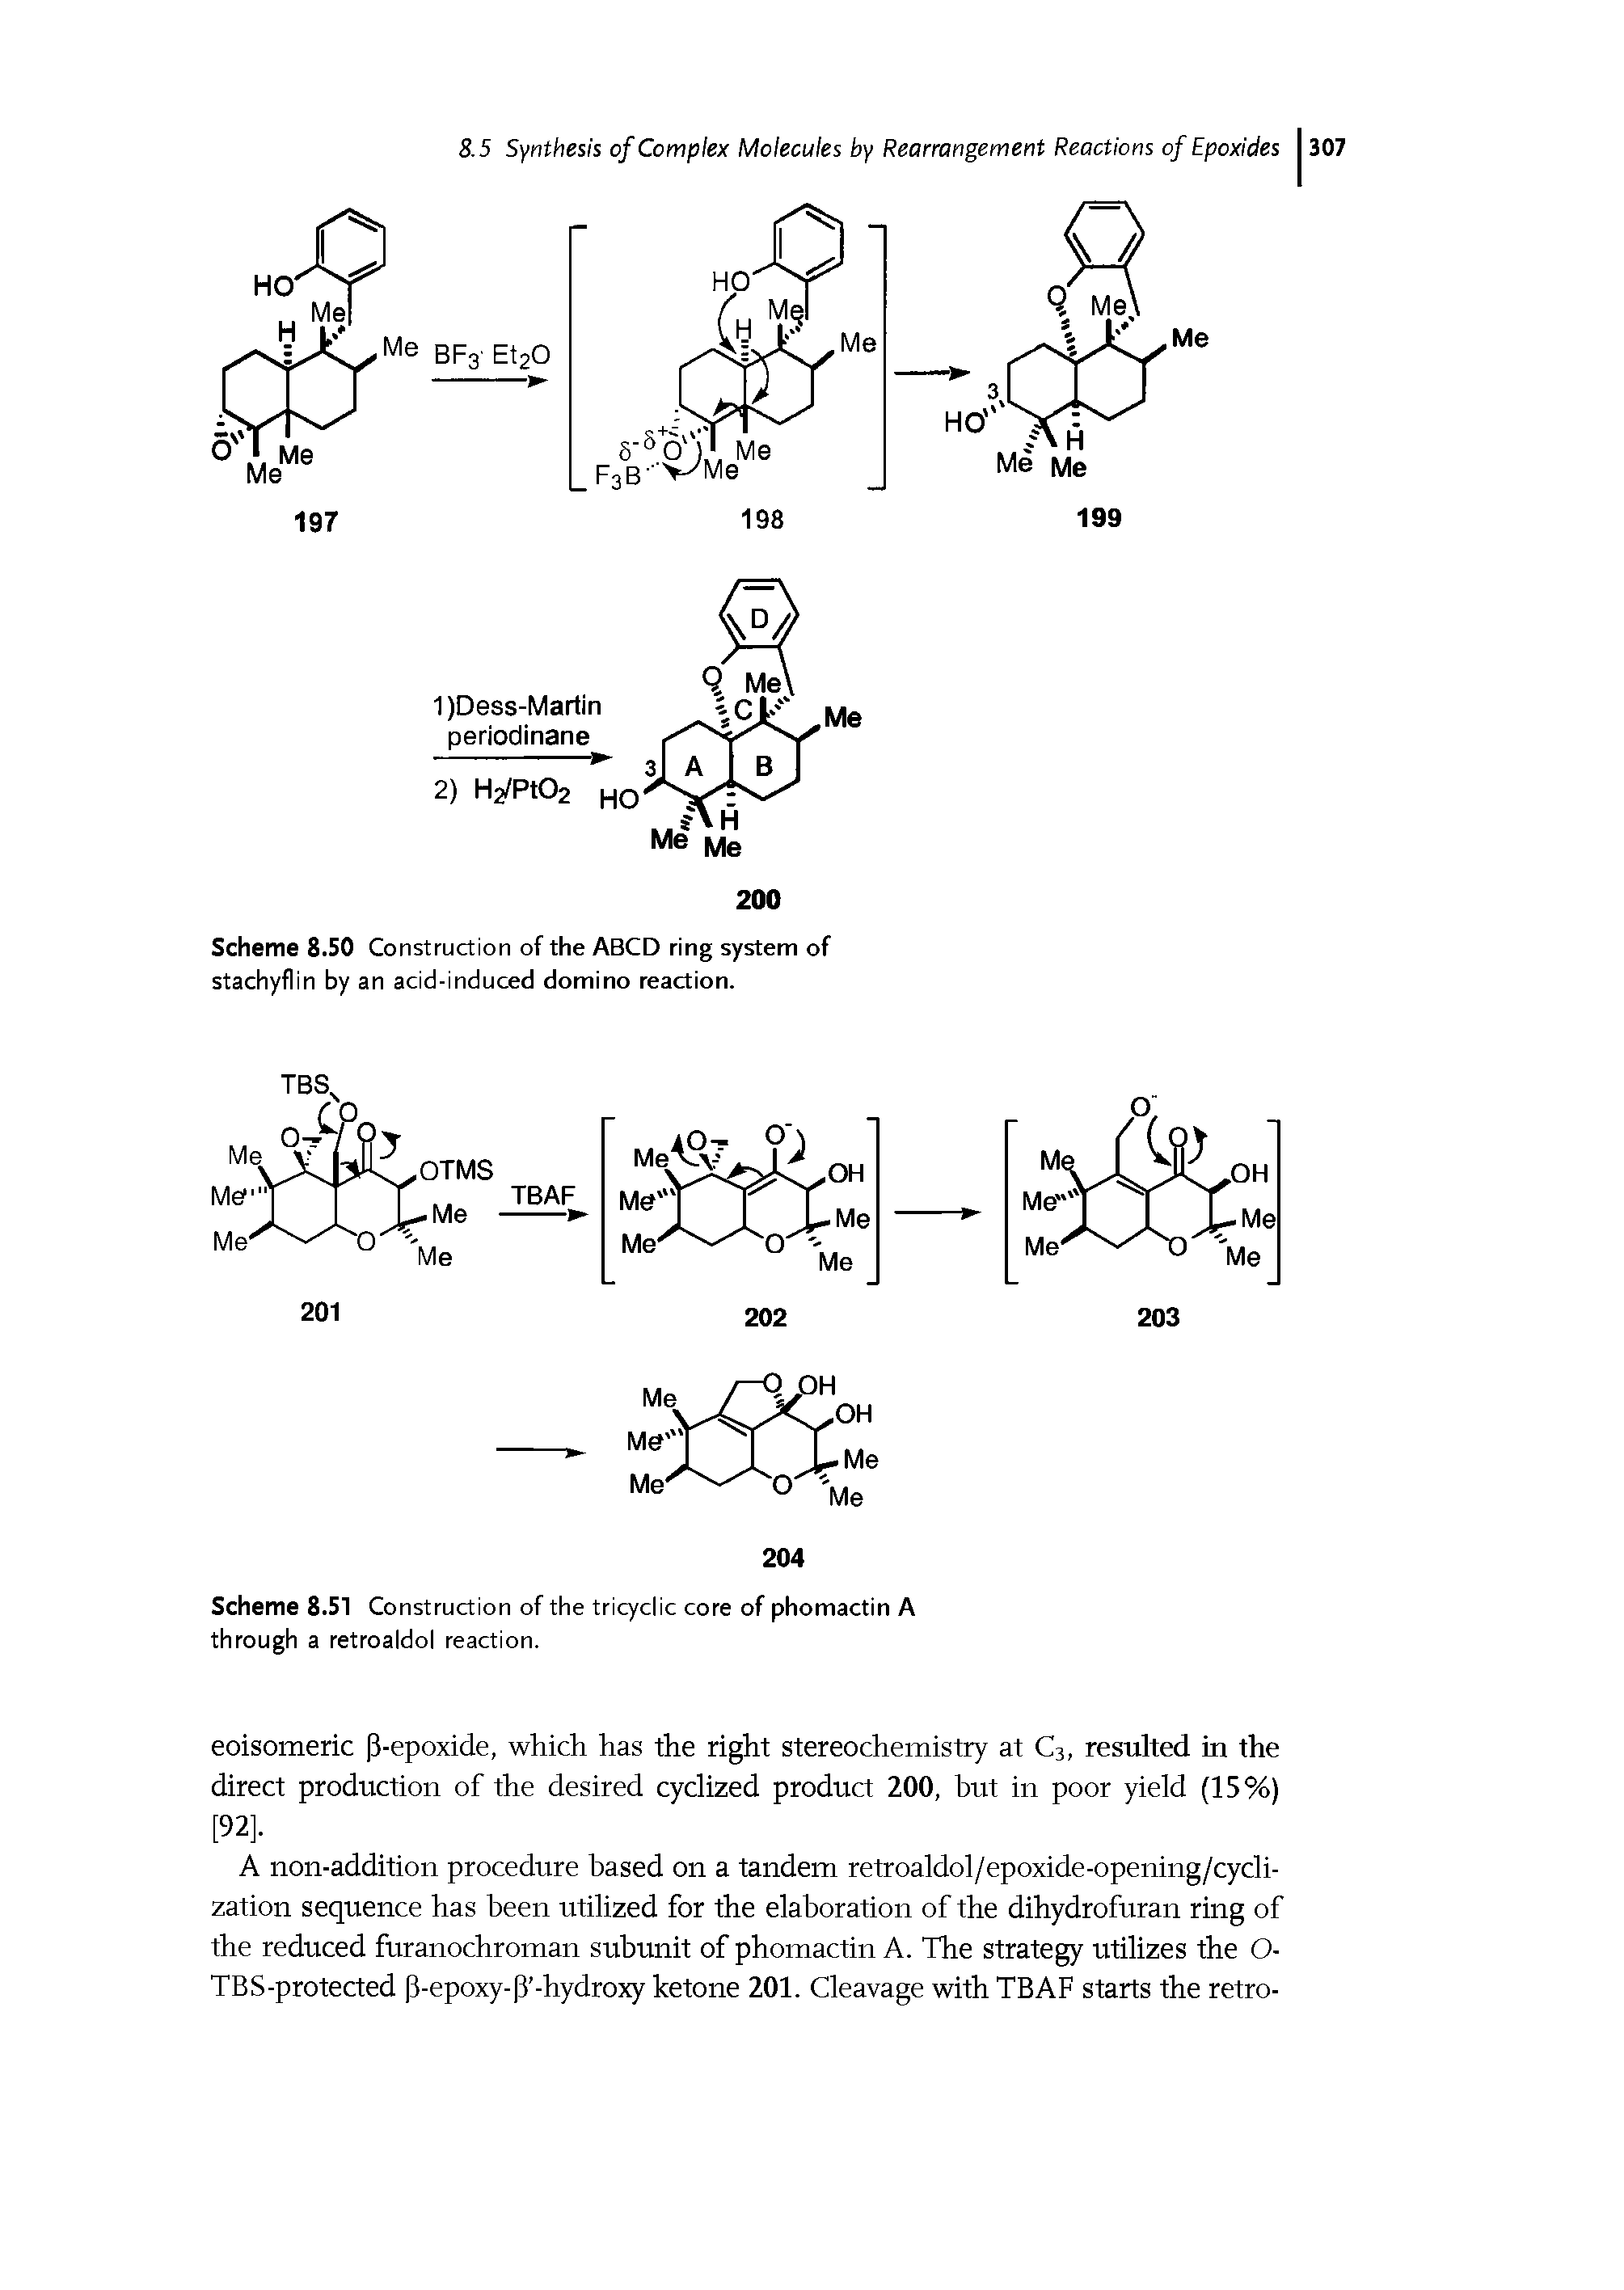 Scheme 8.50 Construction of the ABCD ring system of stachyflin by an acid-induced domino reaction.